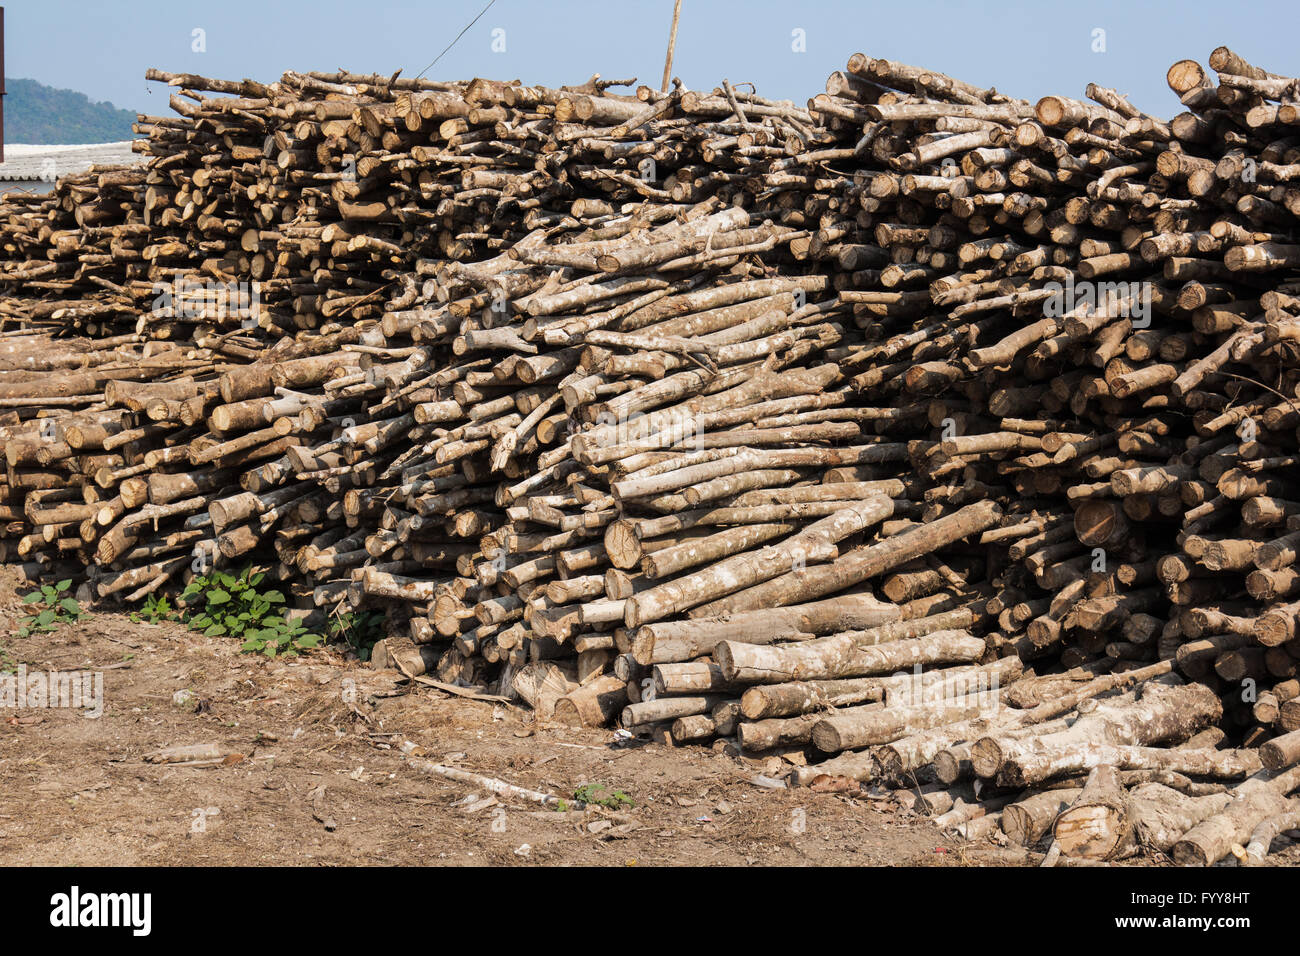 Pile of small wood logs on land Stock Photo